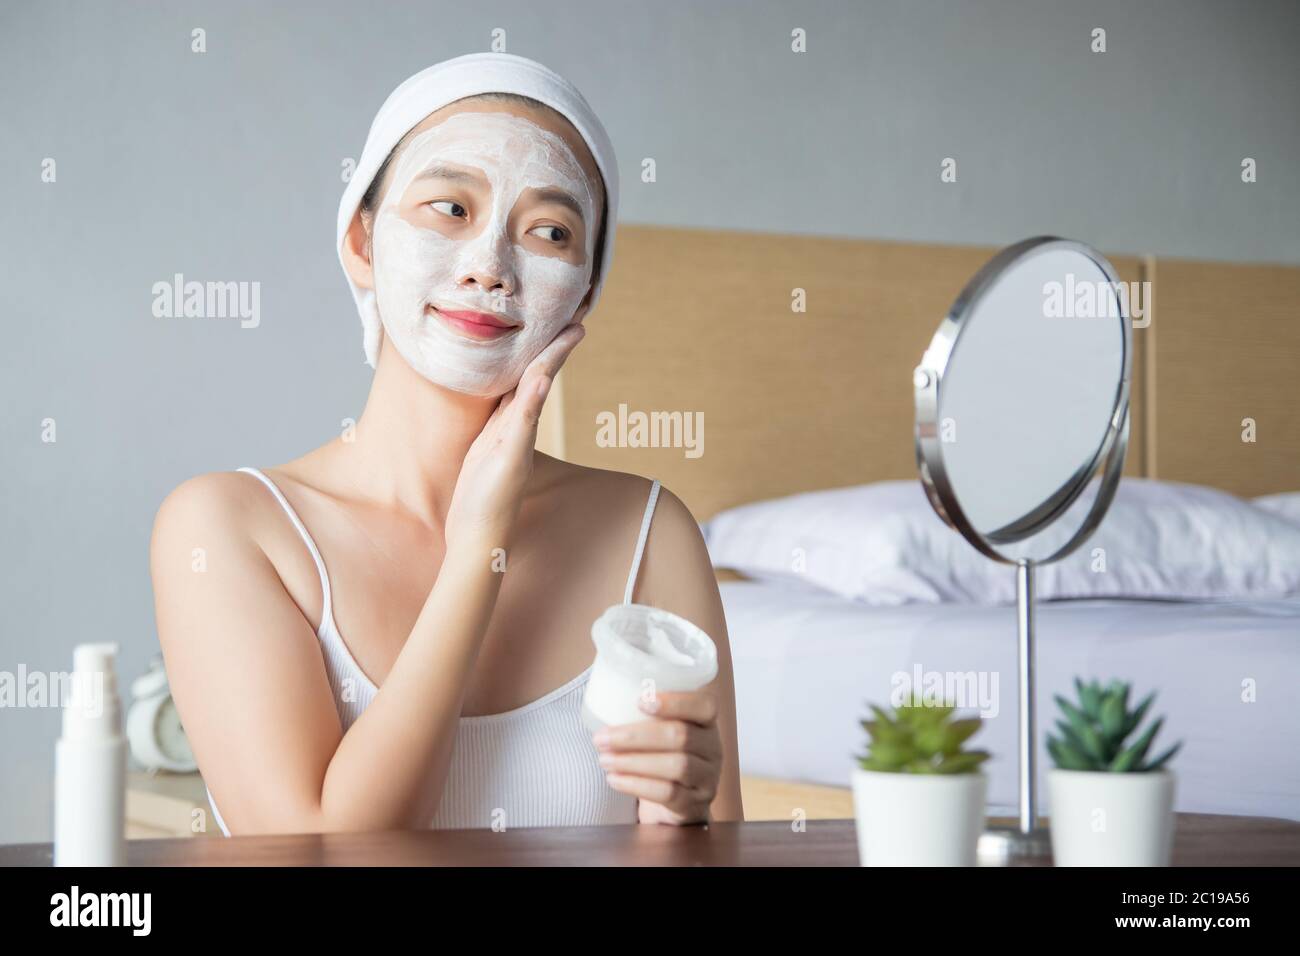 Asian woman applying moisturizer face scrub peeling white clay mask on skin, looking in mirror with smiley face using cream, touching face. Stock Photo